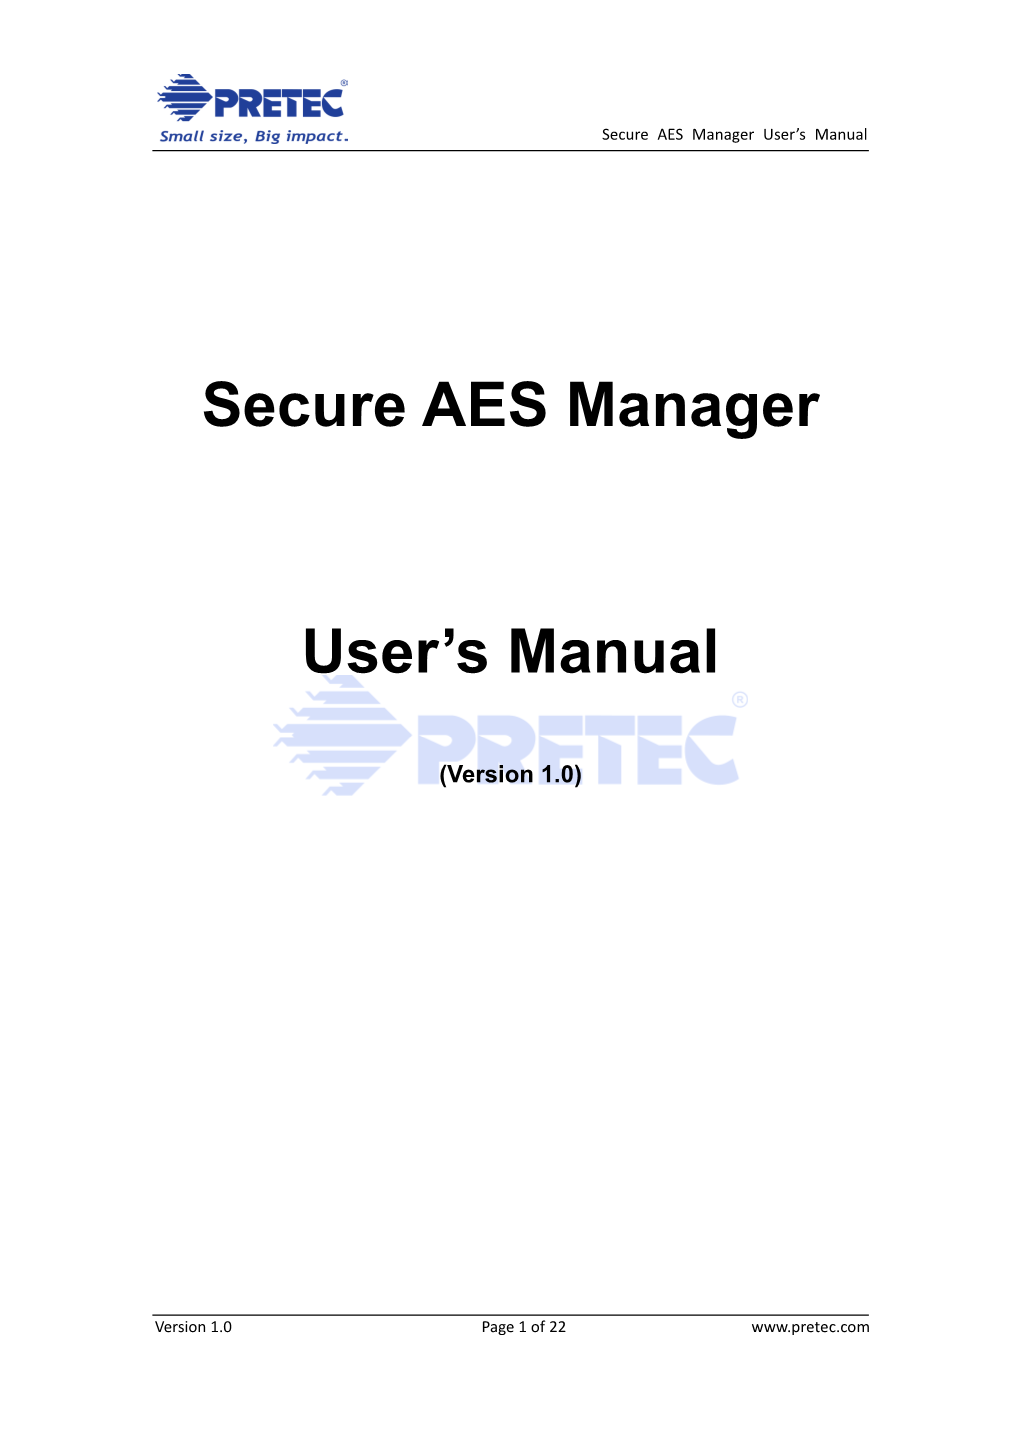 Secure AES Manager User's Manual